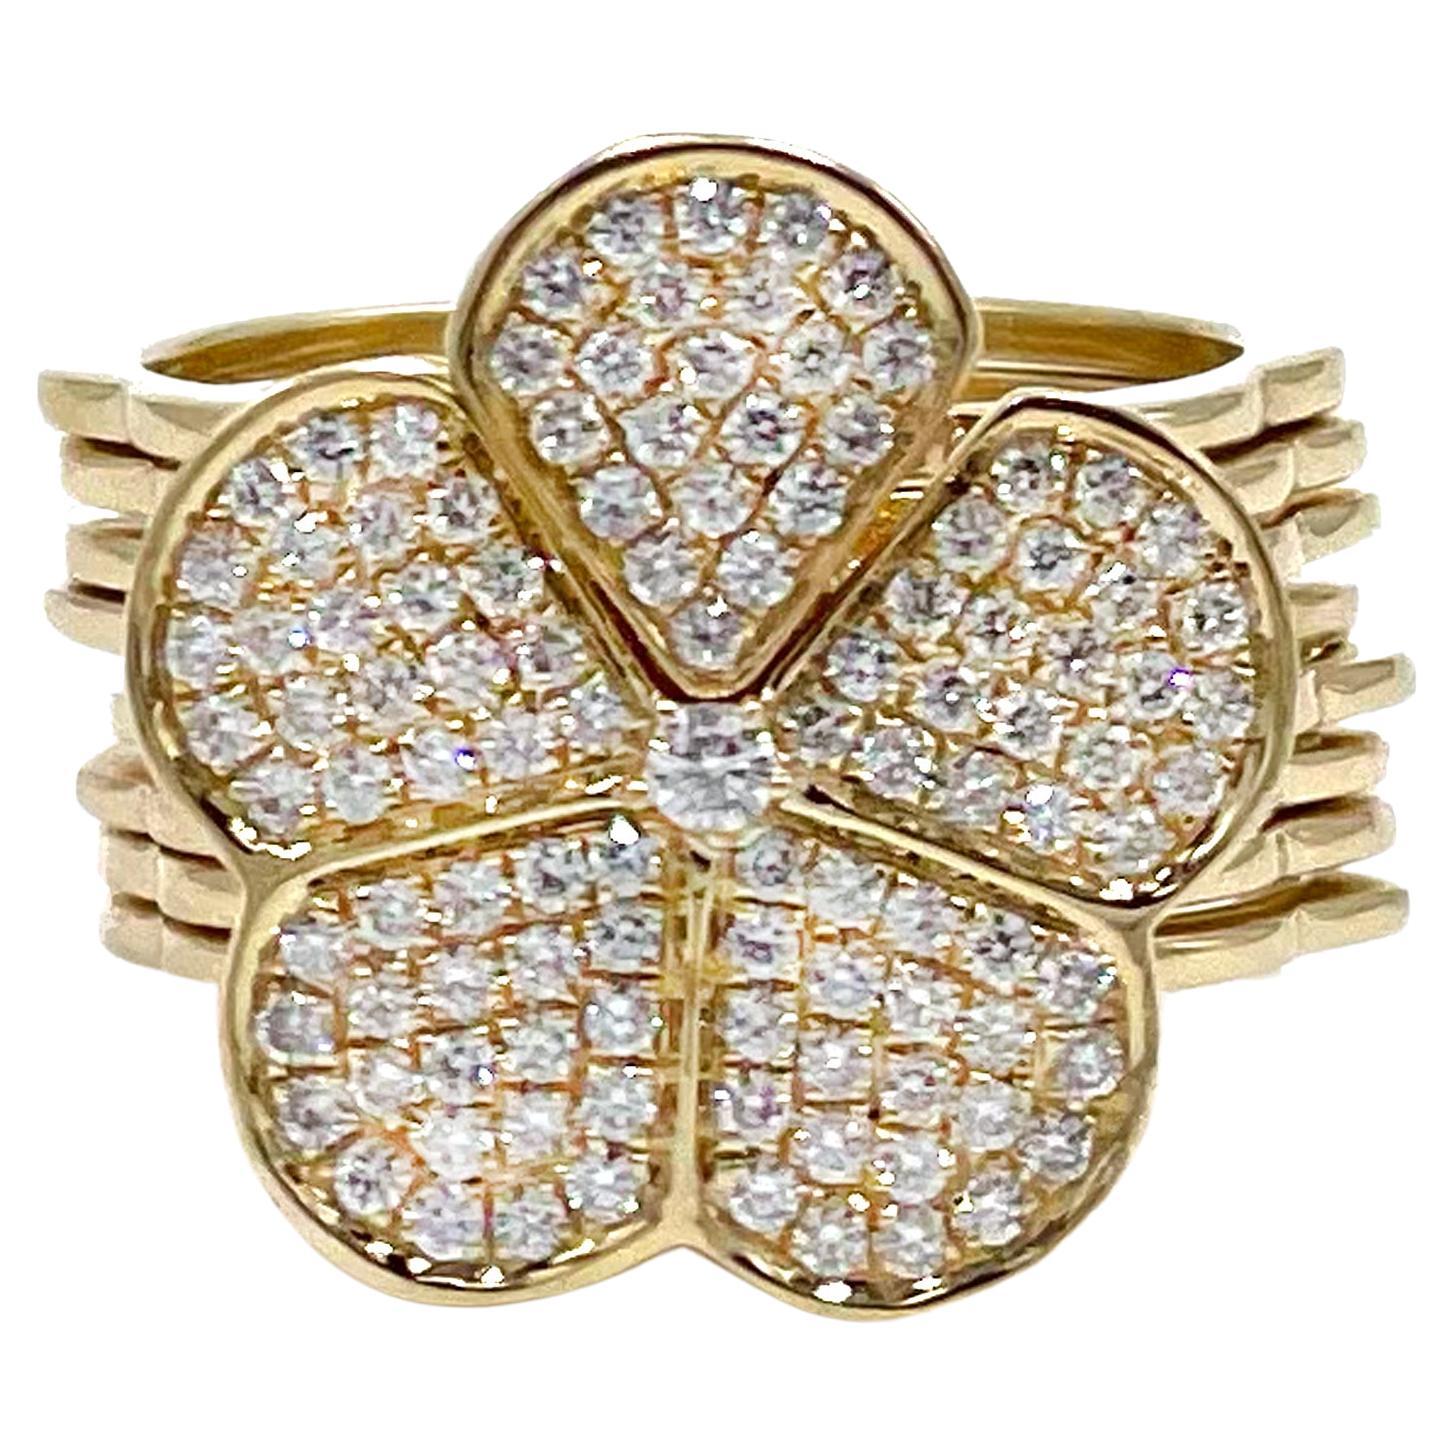 One piece of jewelry worn two different ways! This beautifully crafted 18K yellow gold flower ring converts into a flexible link bracelet.  It features a beautiful flower embellishment adorned with pave set diamonds weighing 0.69 carat total